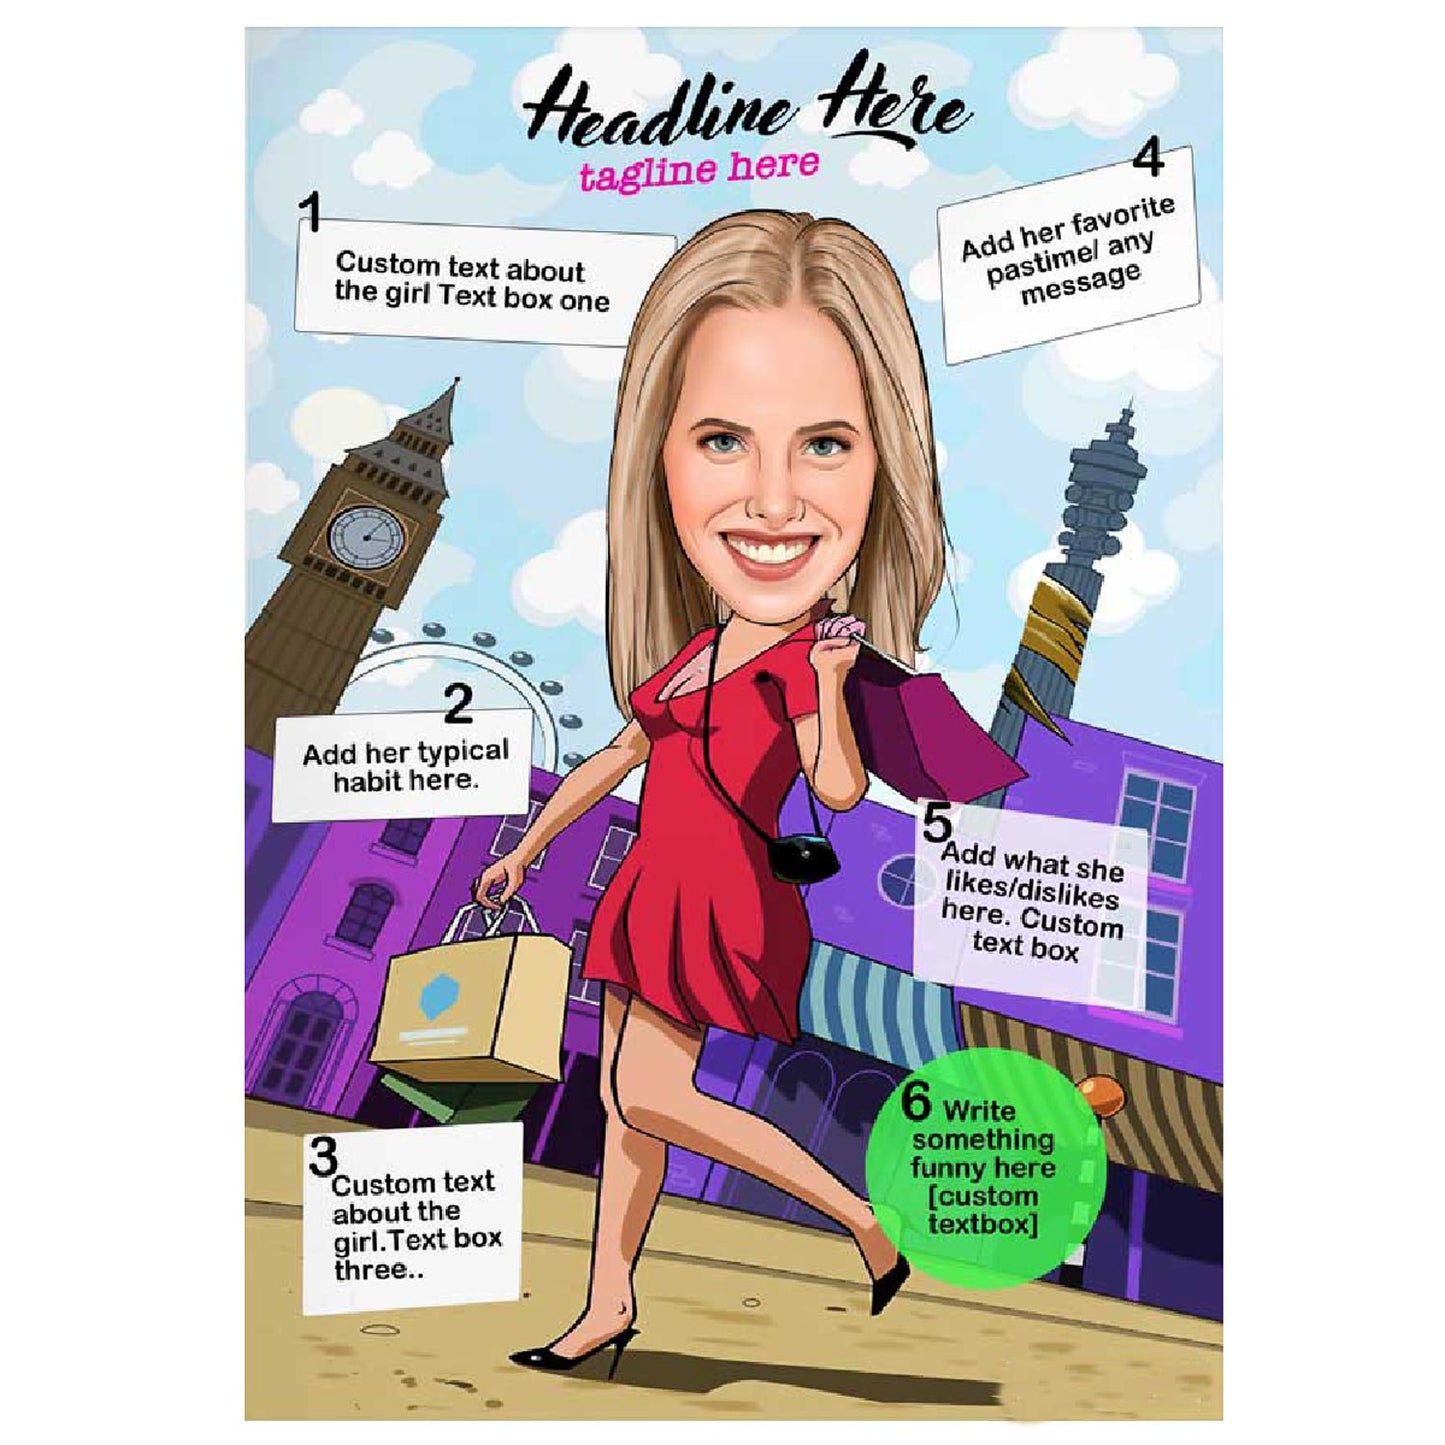 Caricature Poster for Her - Shopping Travelling - withmuchlove